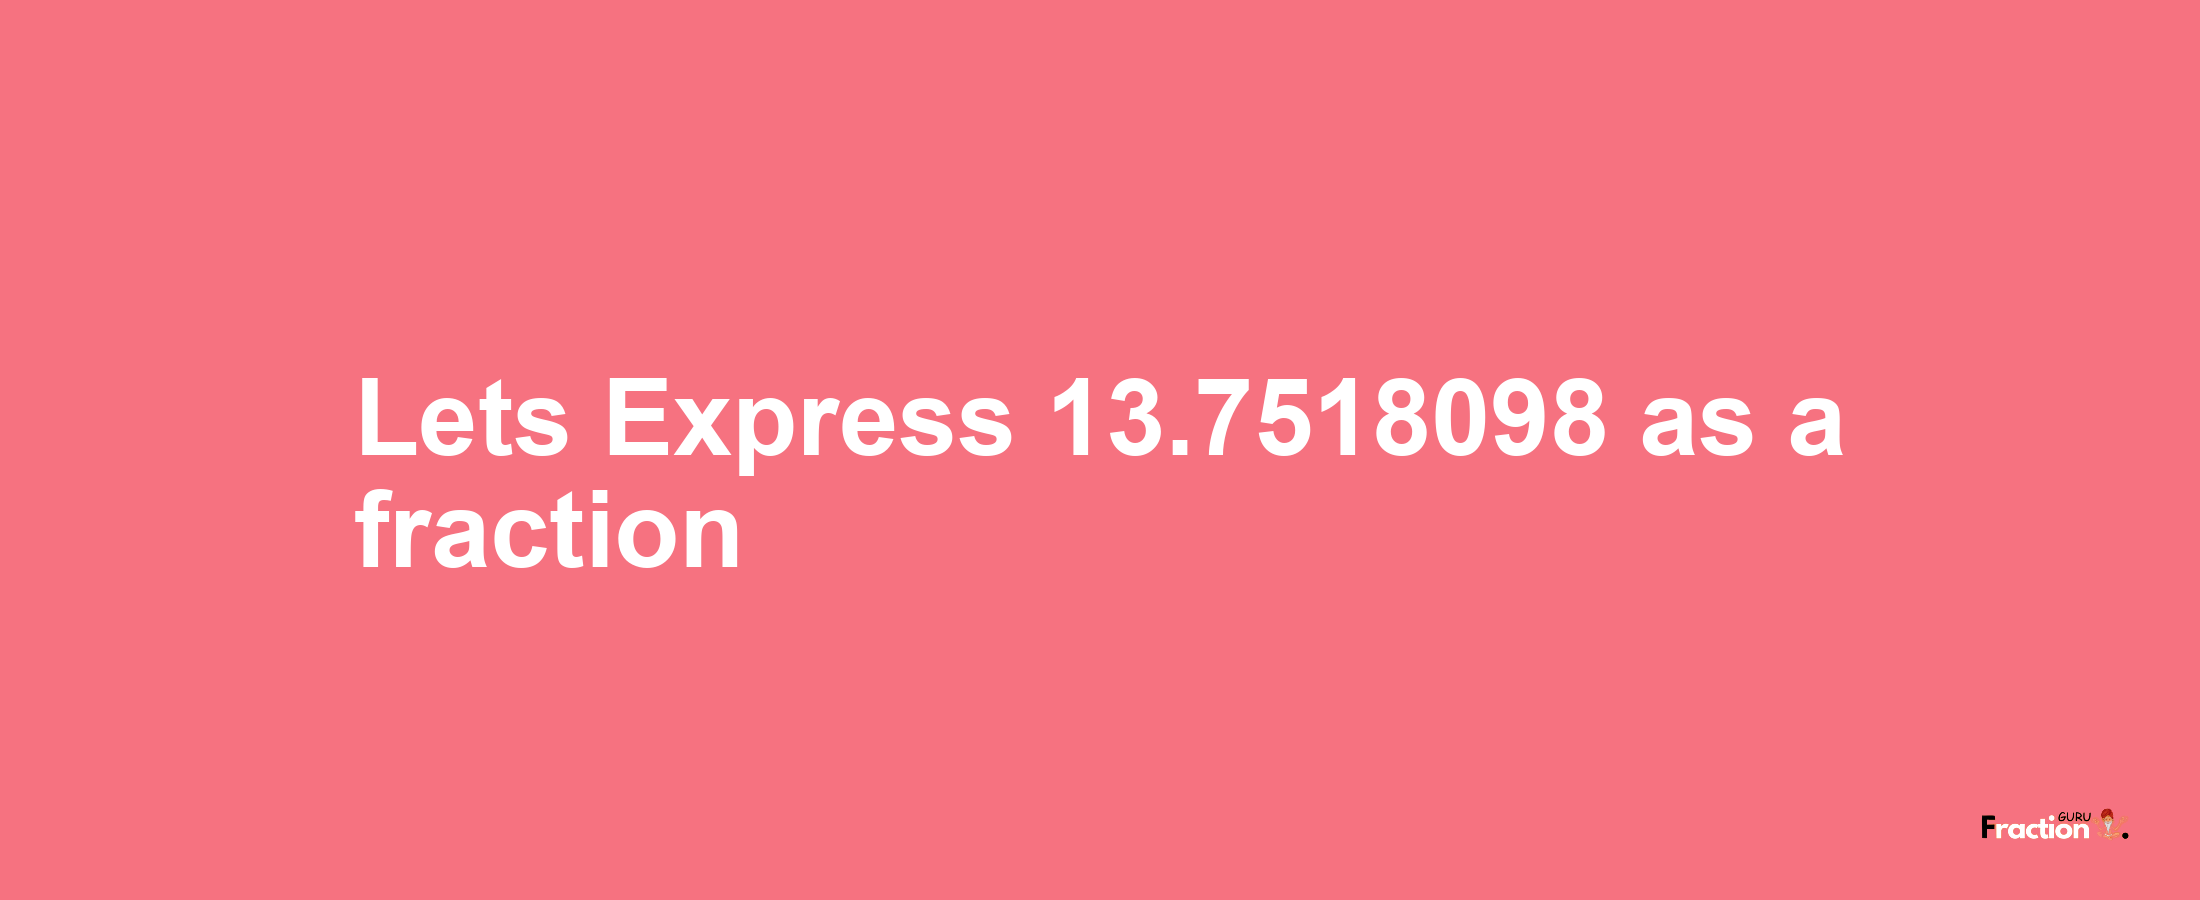 Lets Express 13.7518098 as afraction